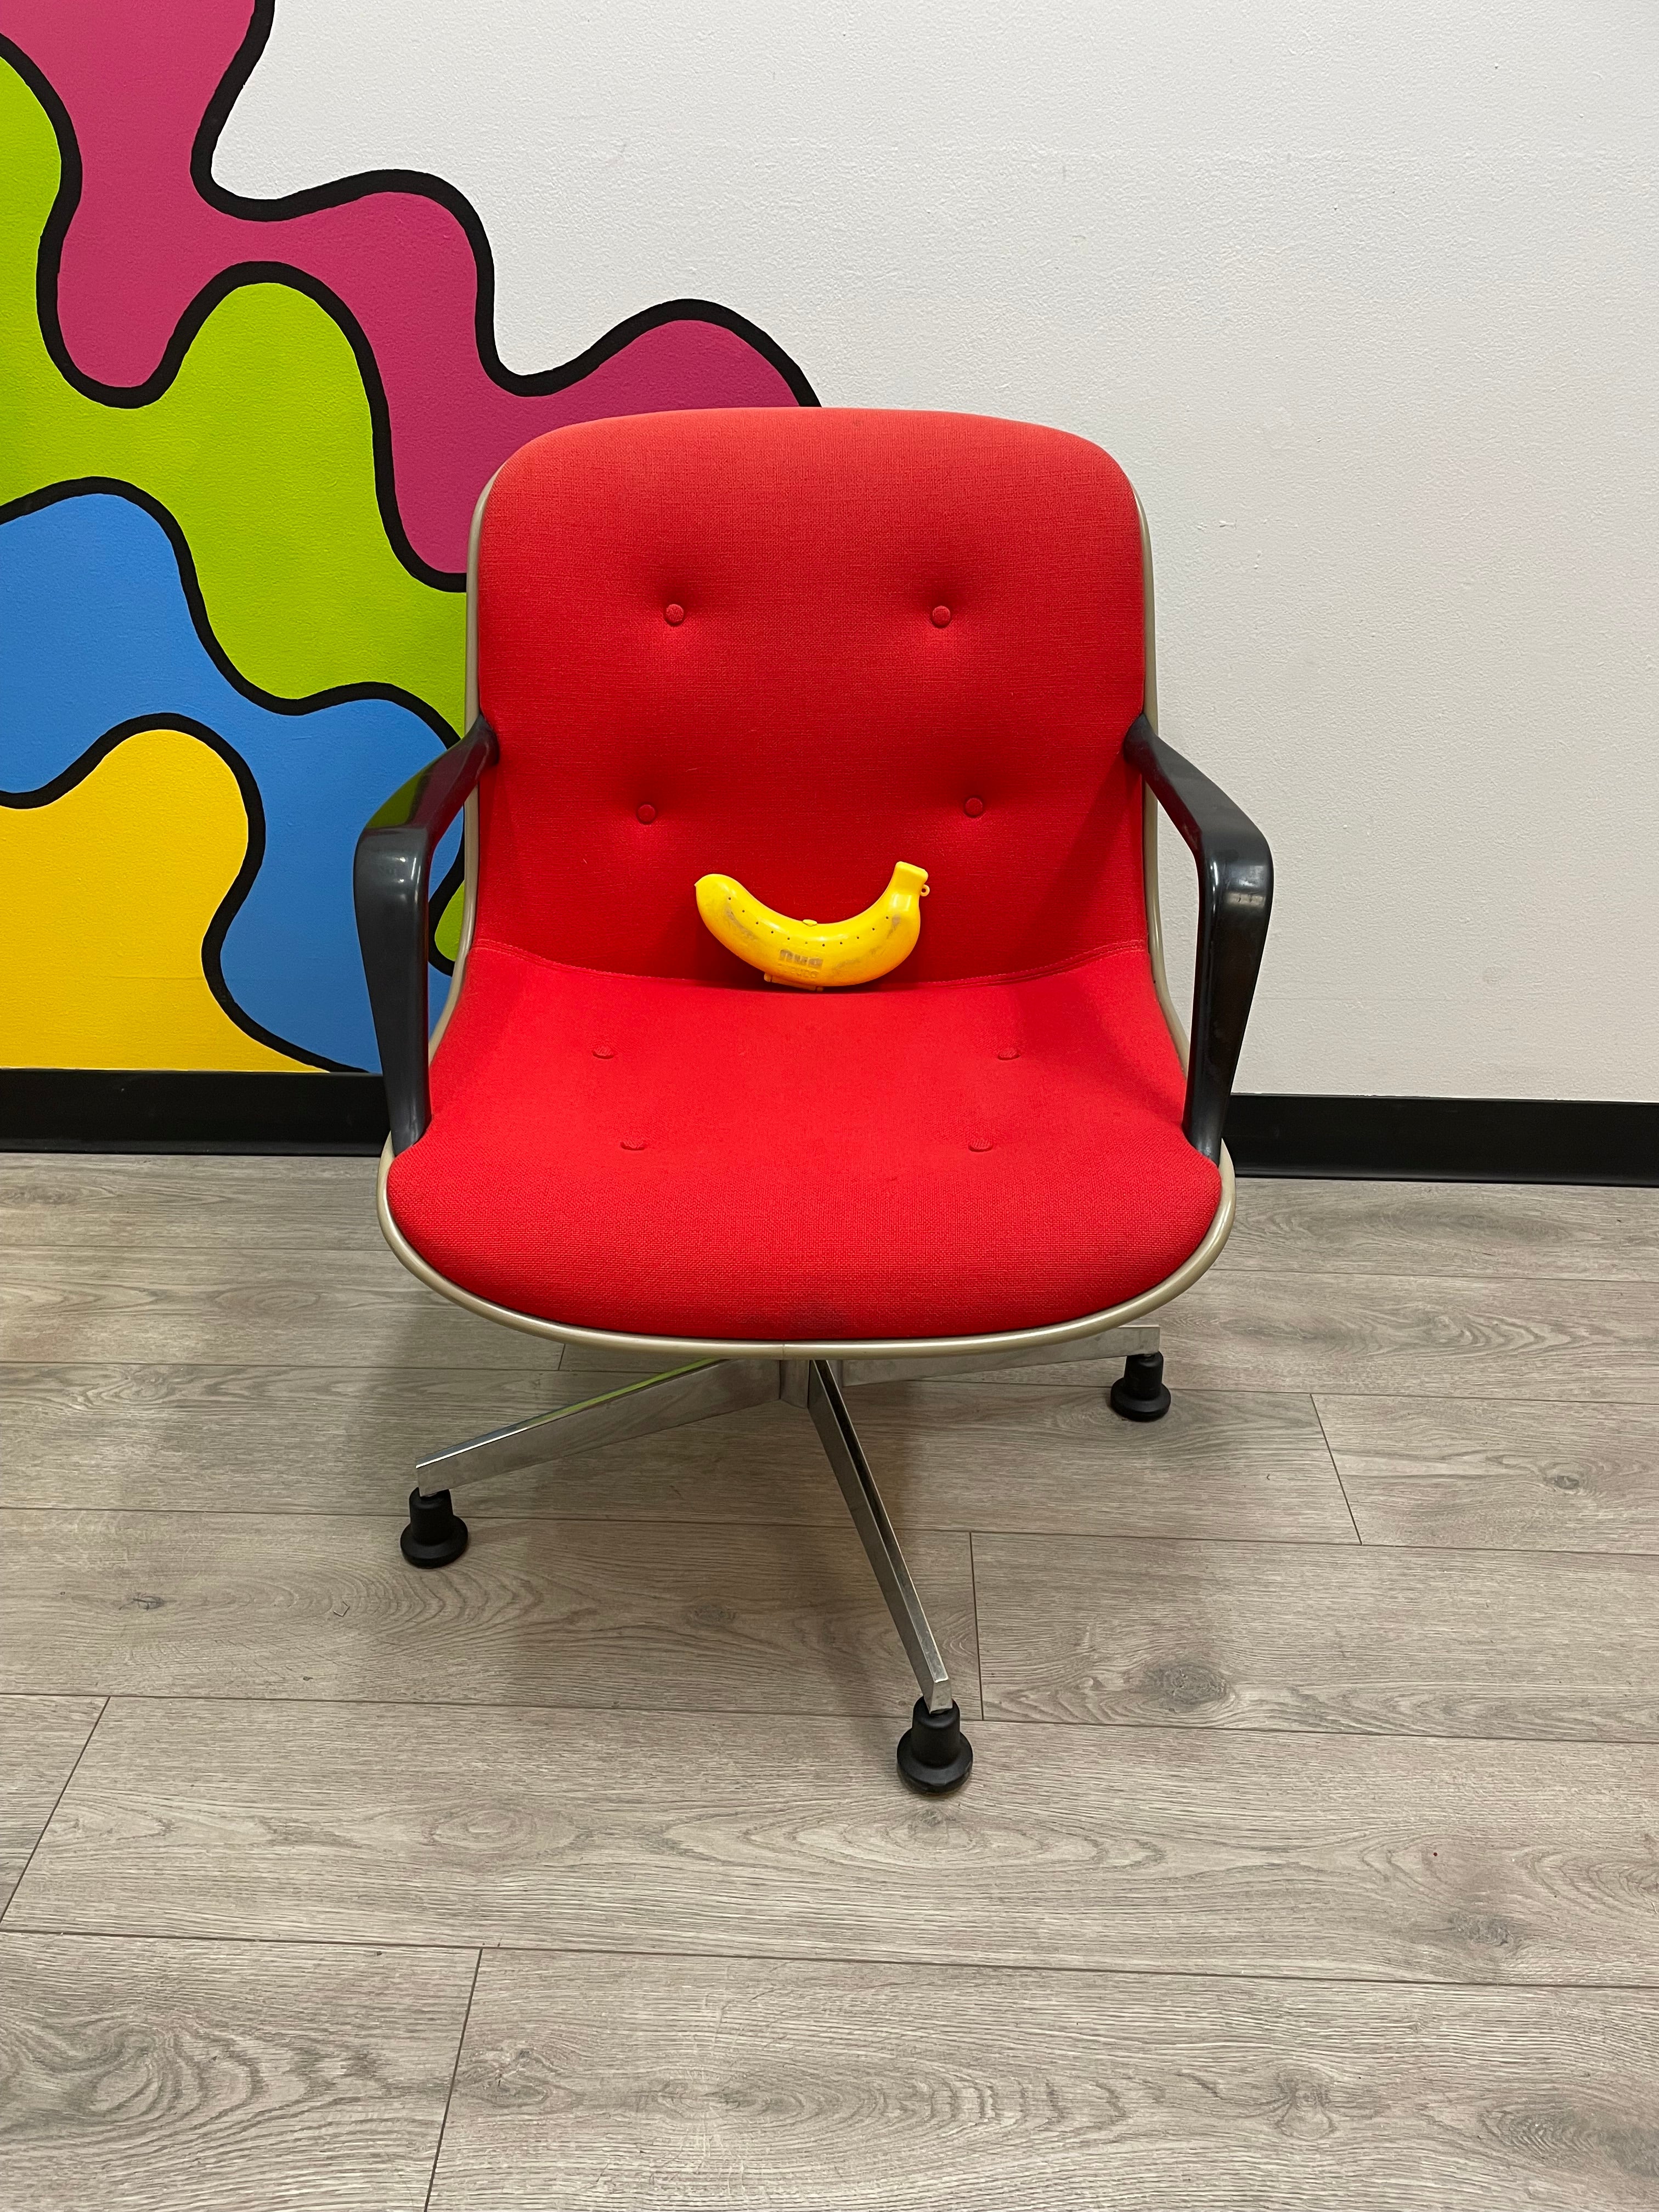 Red Steelcase Chair